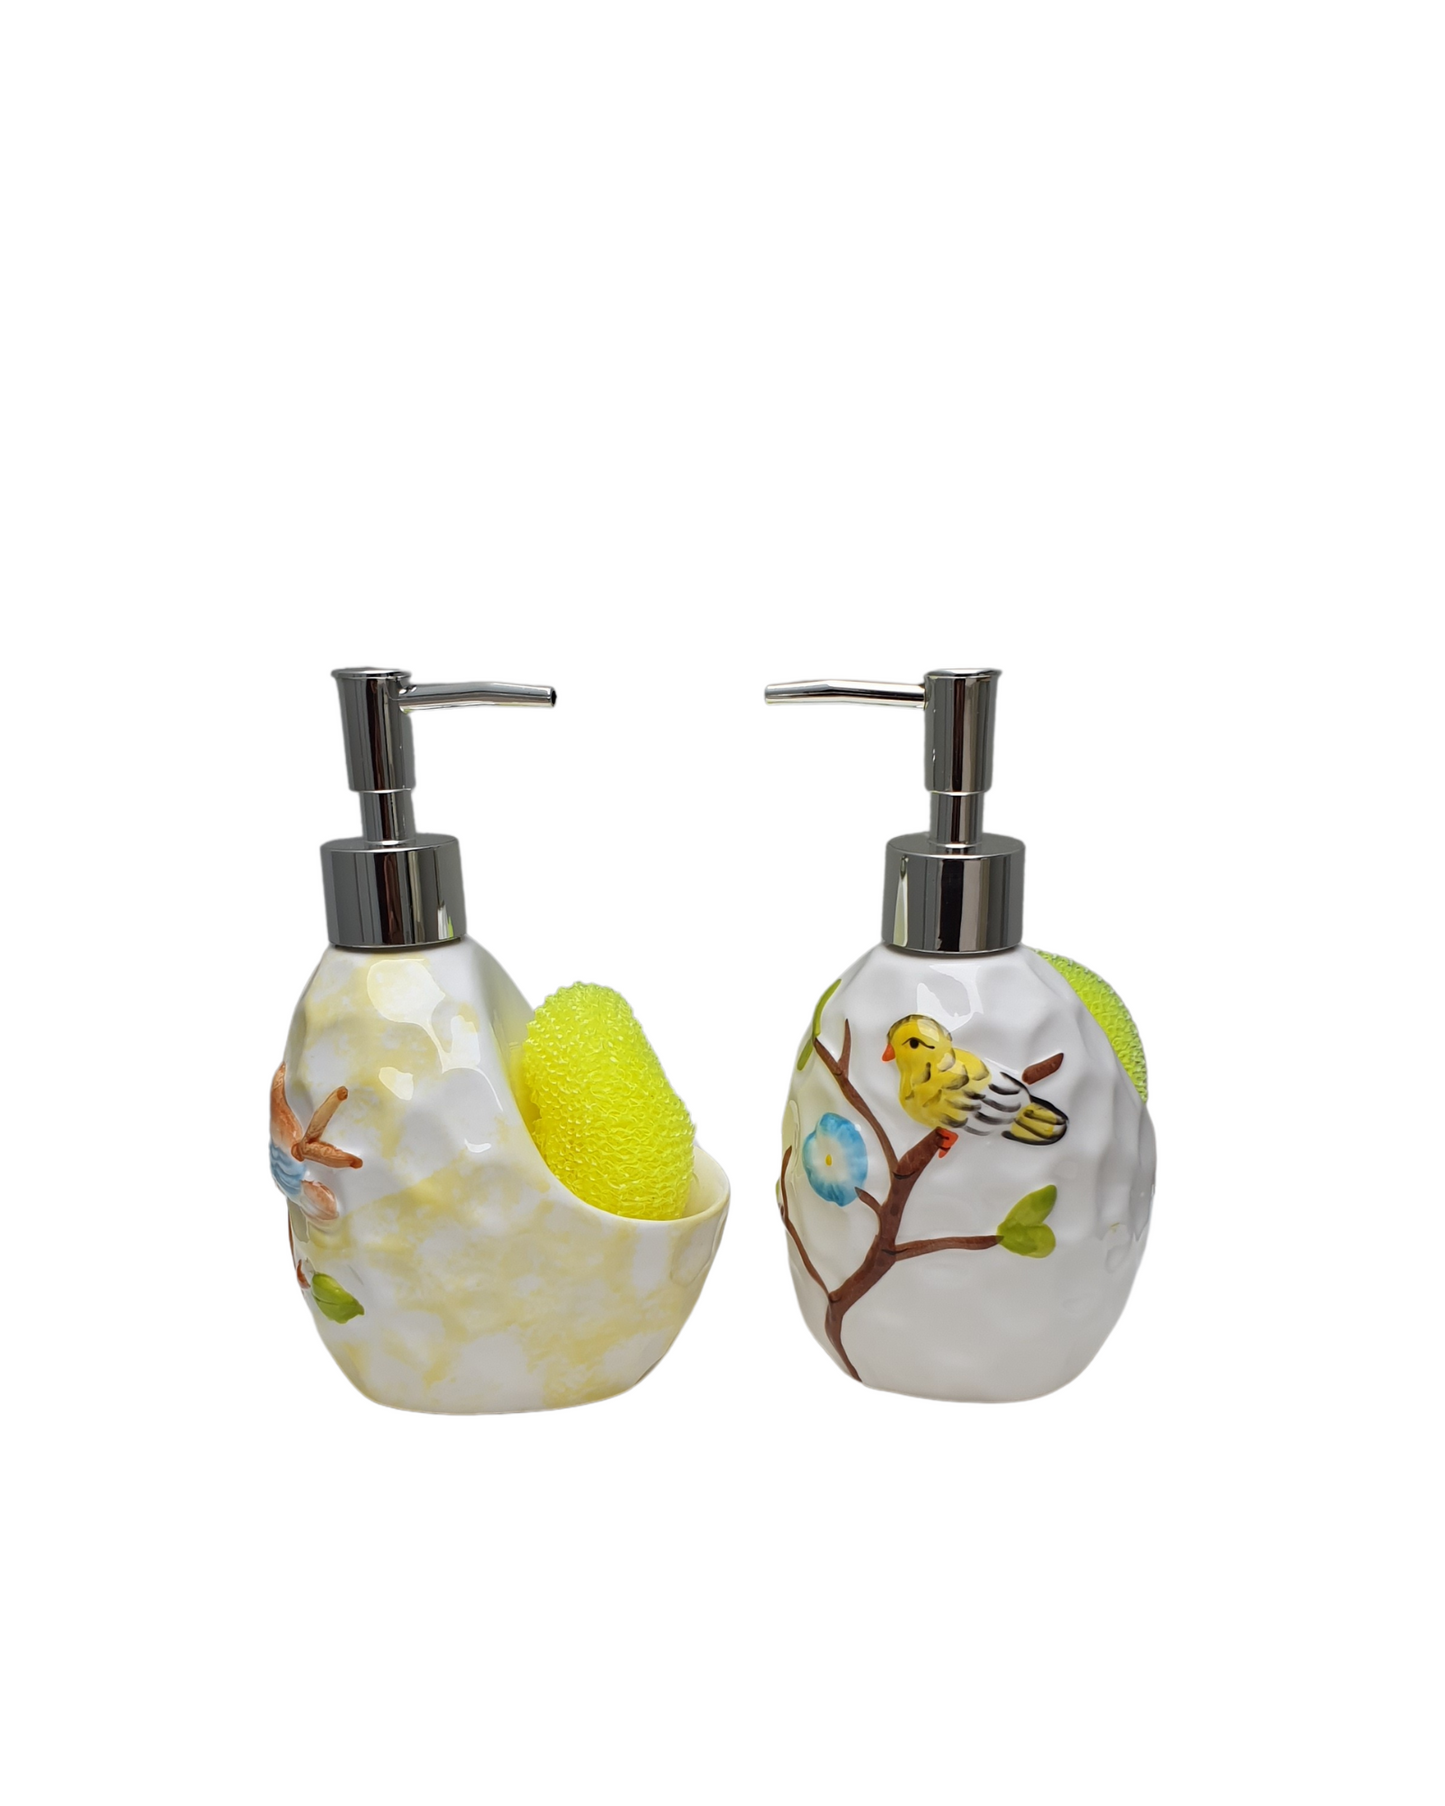 Ceramic Shampoo Dispenser with Soap Holder - Available In 2 Designs